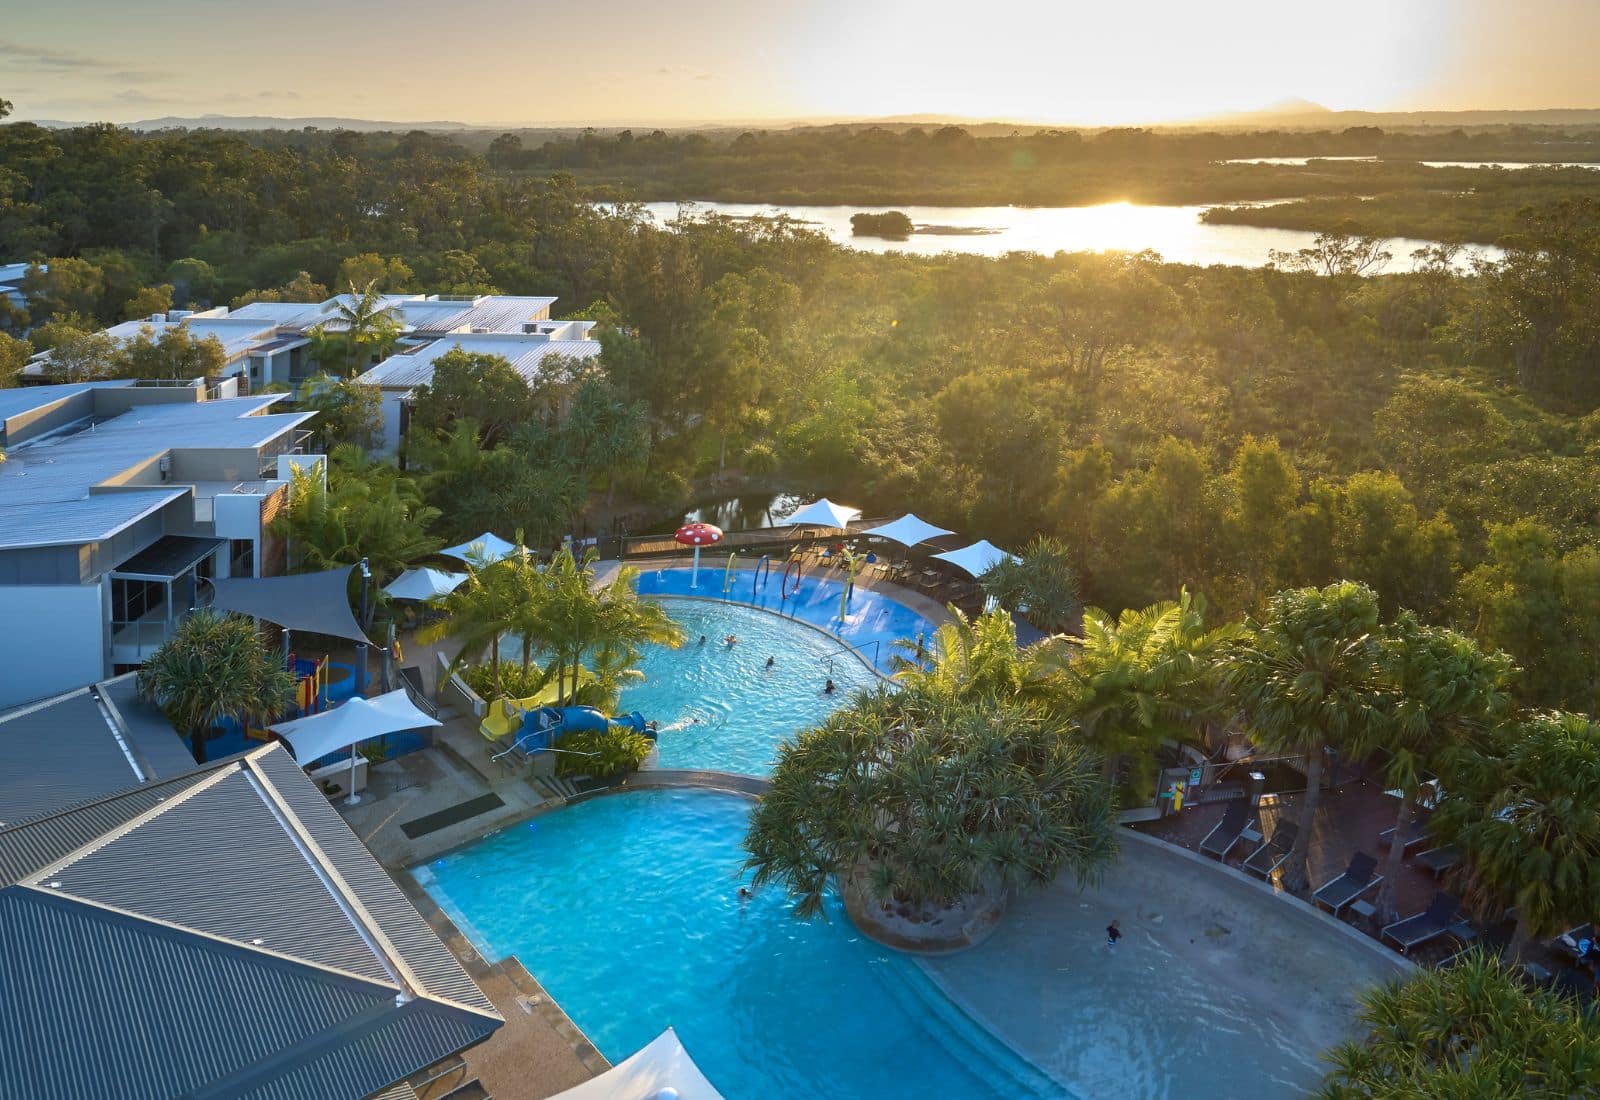 Take the ‘Chill out of Winter’ this year and meet at RACV Noosa Resort